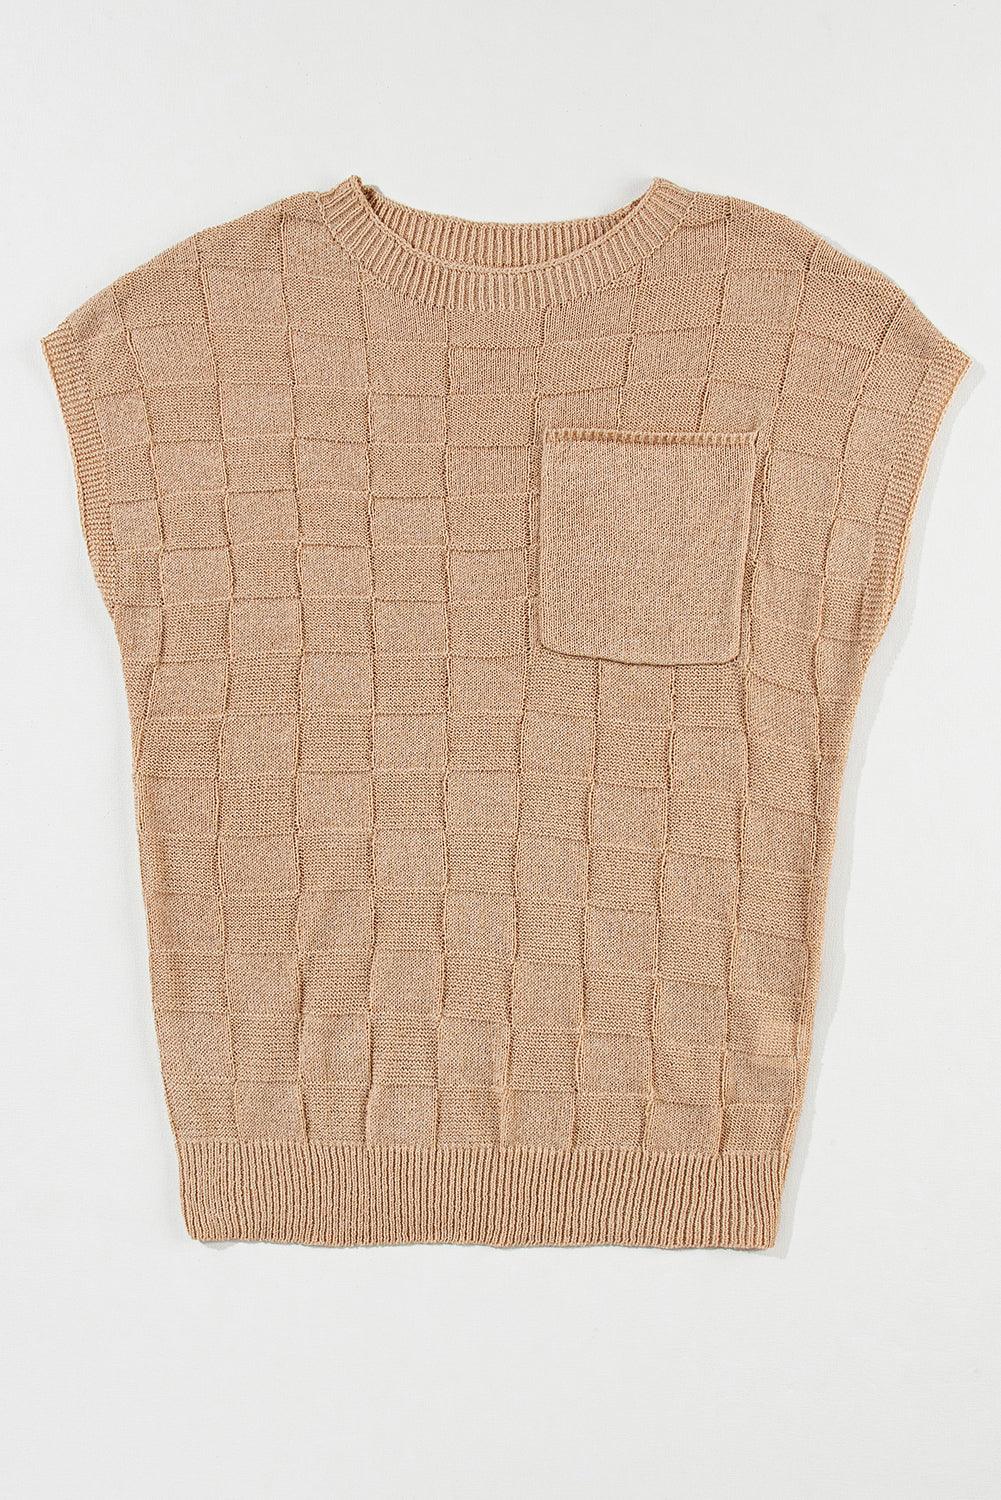 Checkers Textured Knit Short Sleeve Sweater